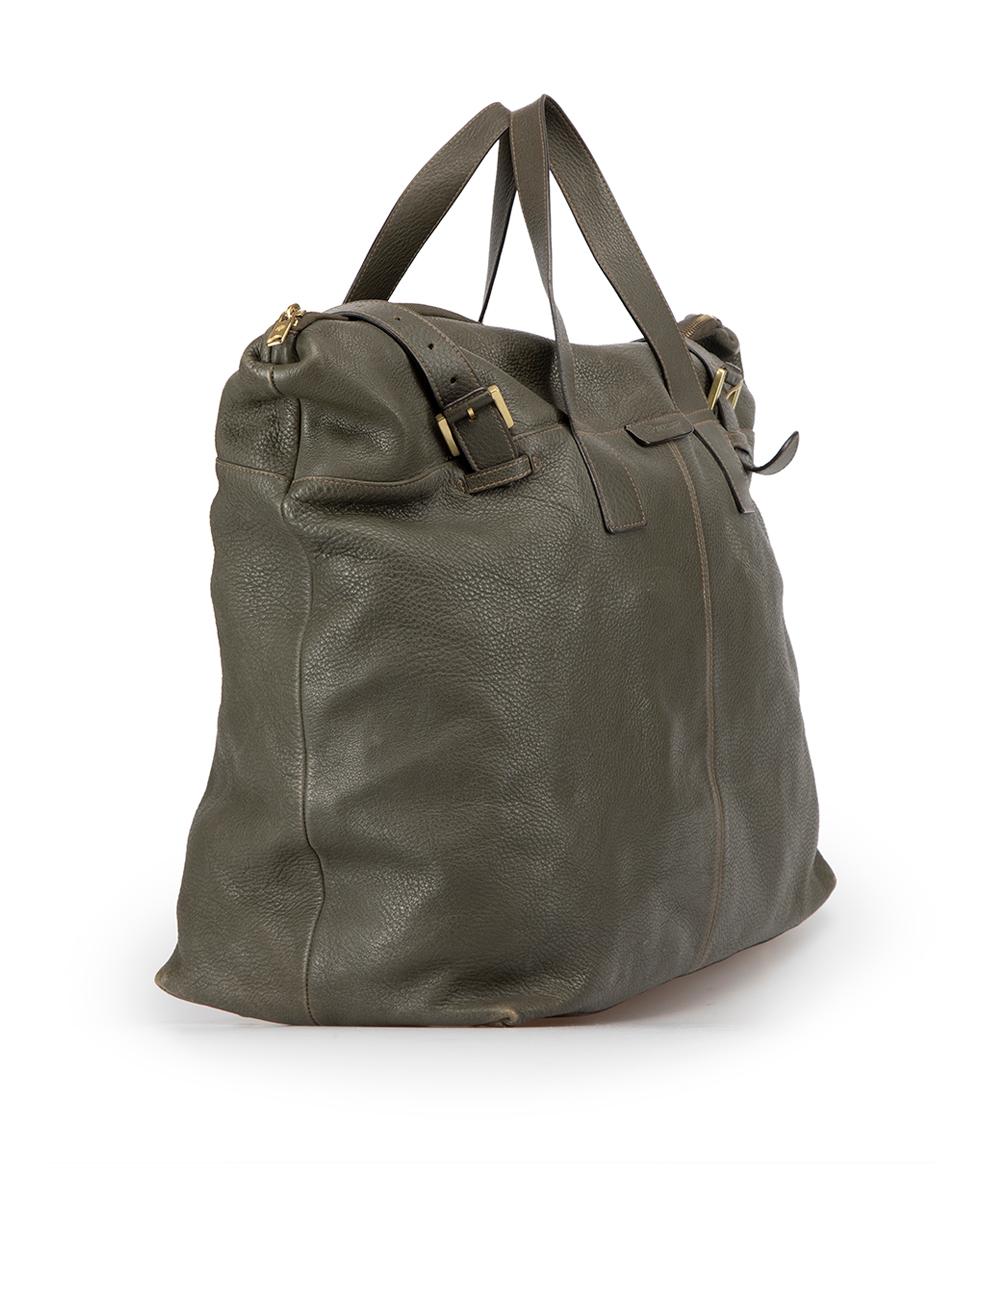 CONDITION is Good. Minor wear to bag is evident. Light wear to the front, back, base and top handles with scuffs to the leather. The zip hardware also has tarnished with time on this used Mulberry designer resale item. This item comes with original